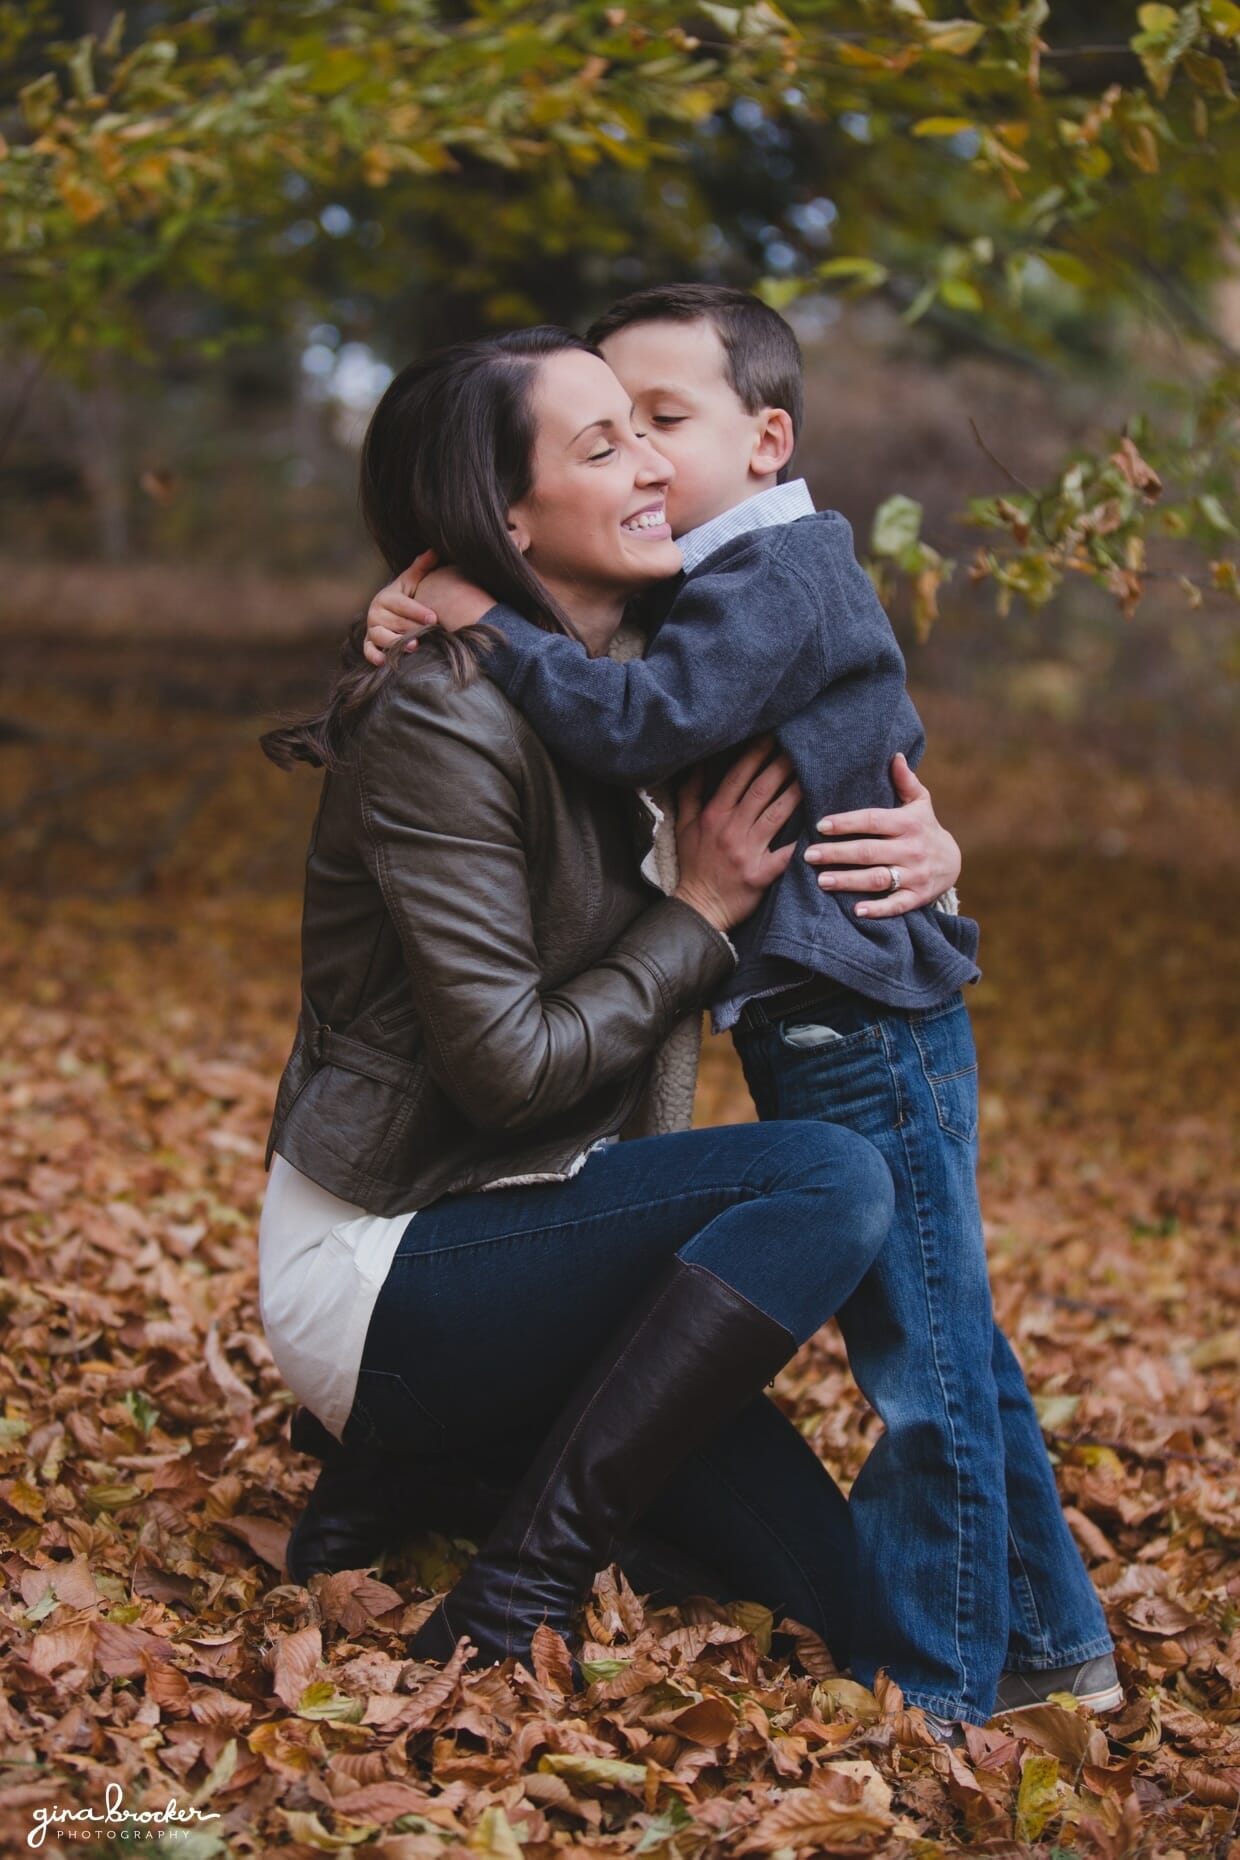 A sweet photograph of a son hugging his mom during a fall family photo session at the Arnold Arboretum in Boston, Massachusetts